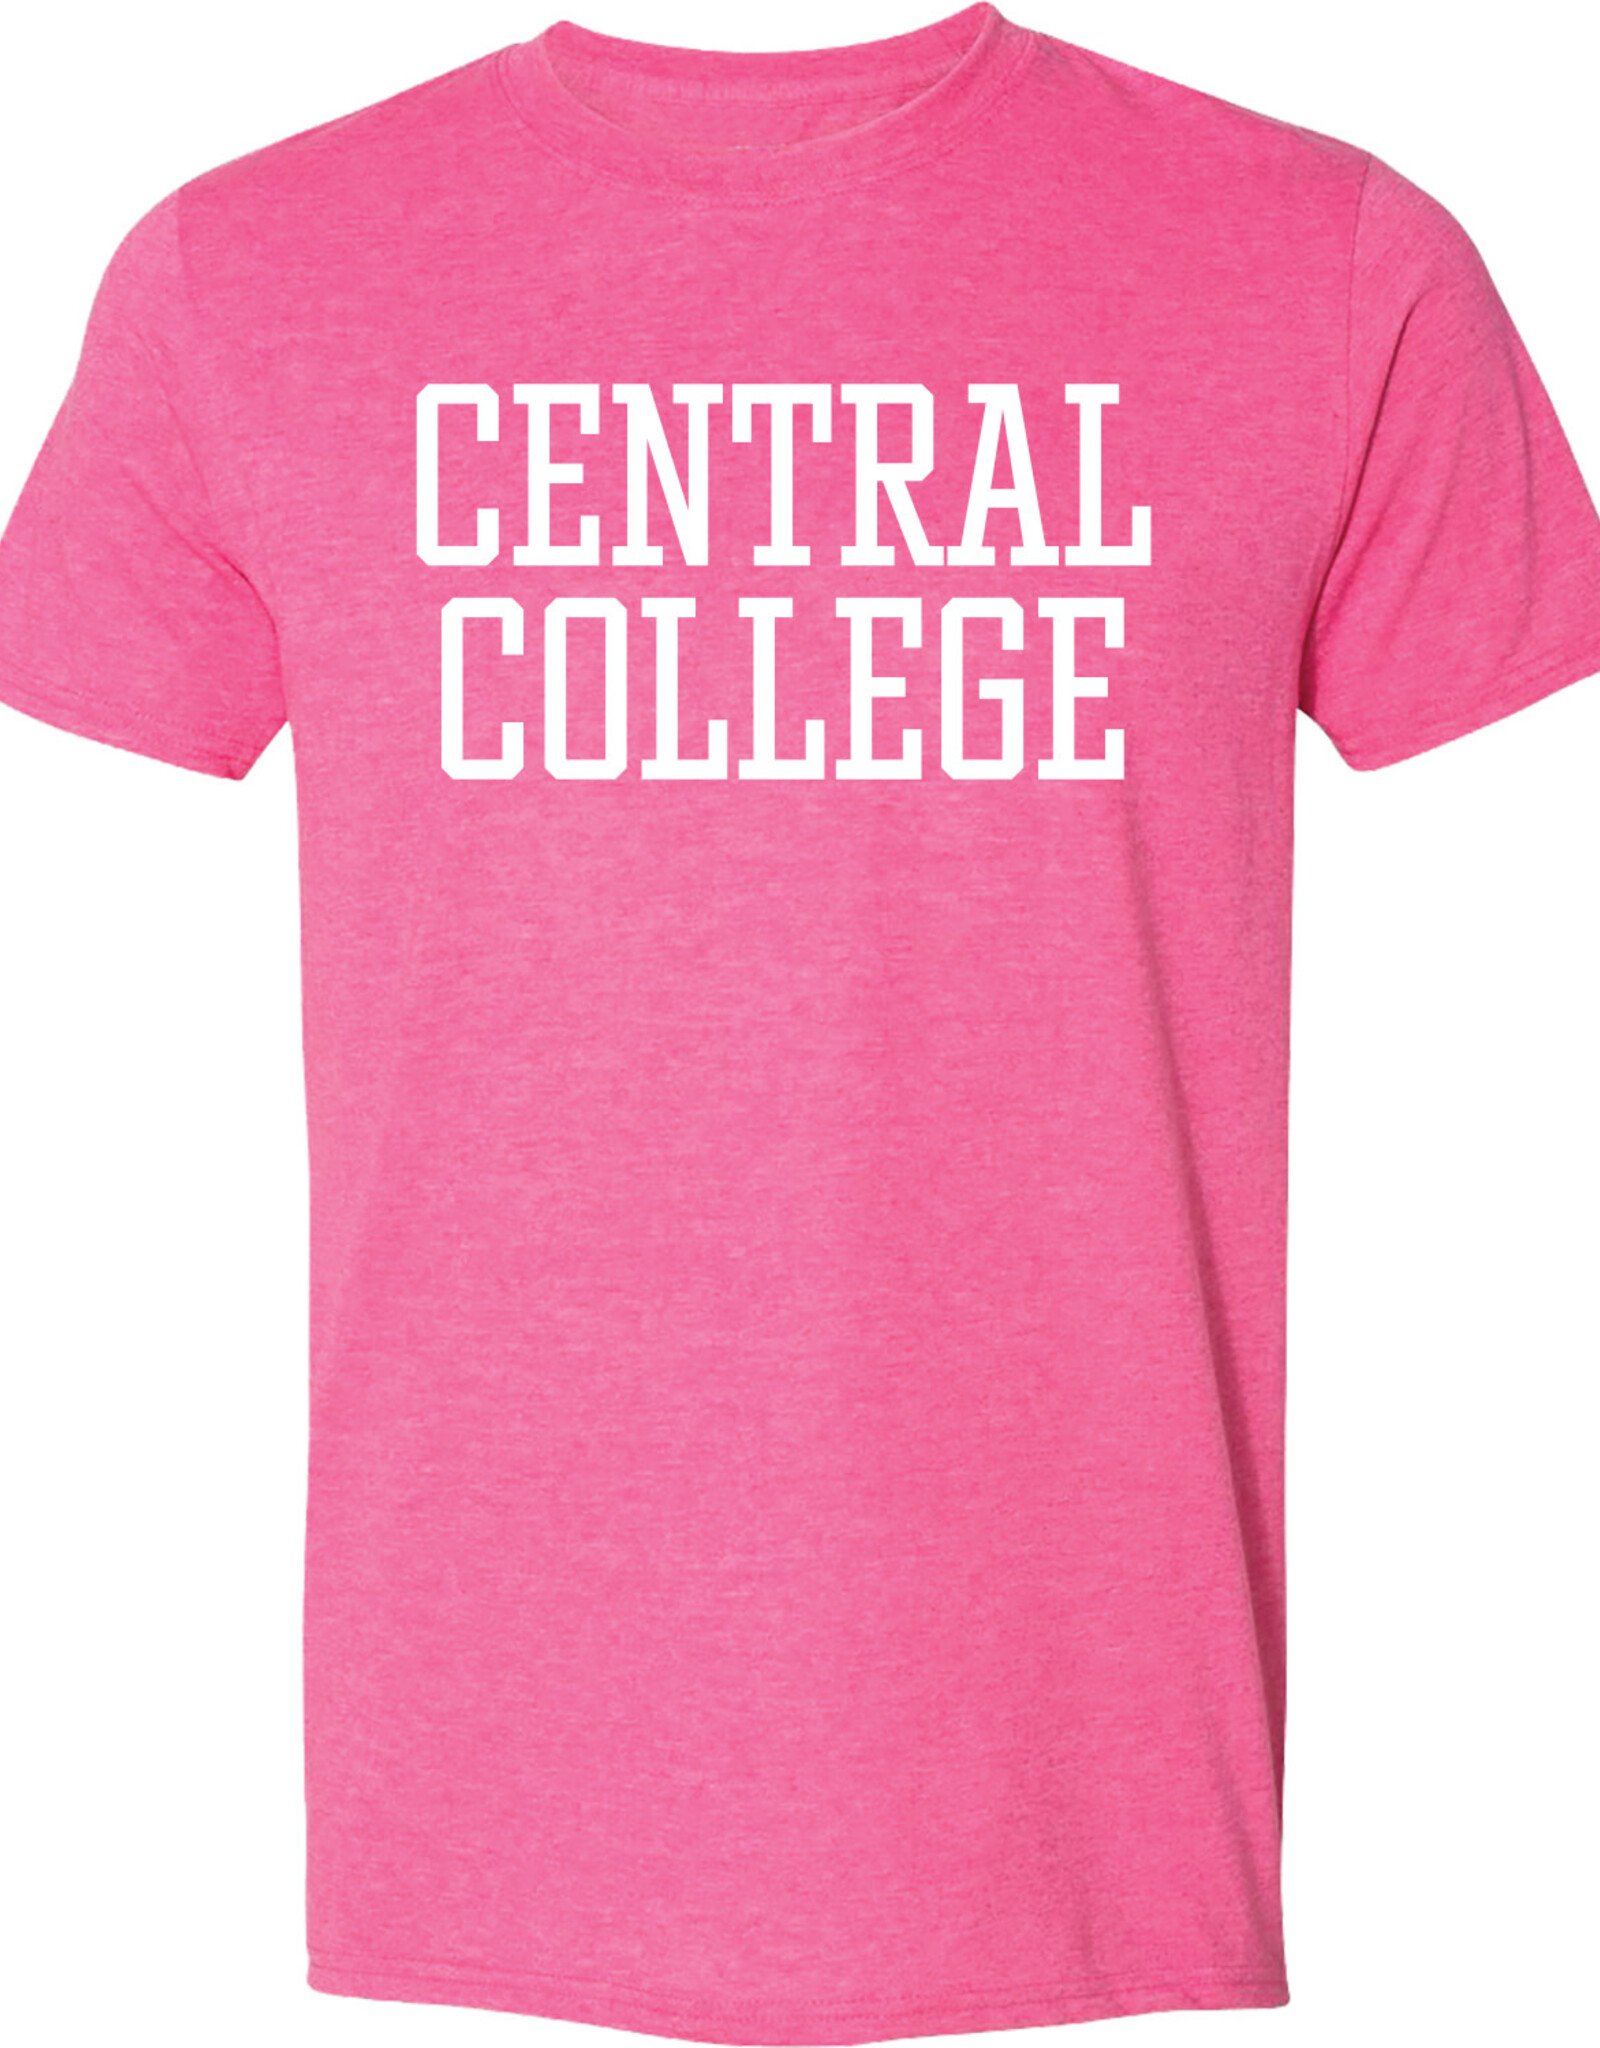 College House College House Tee Asst. Central College Pink